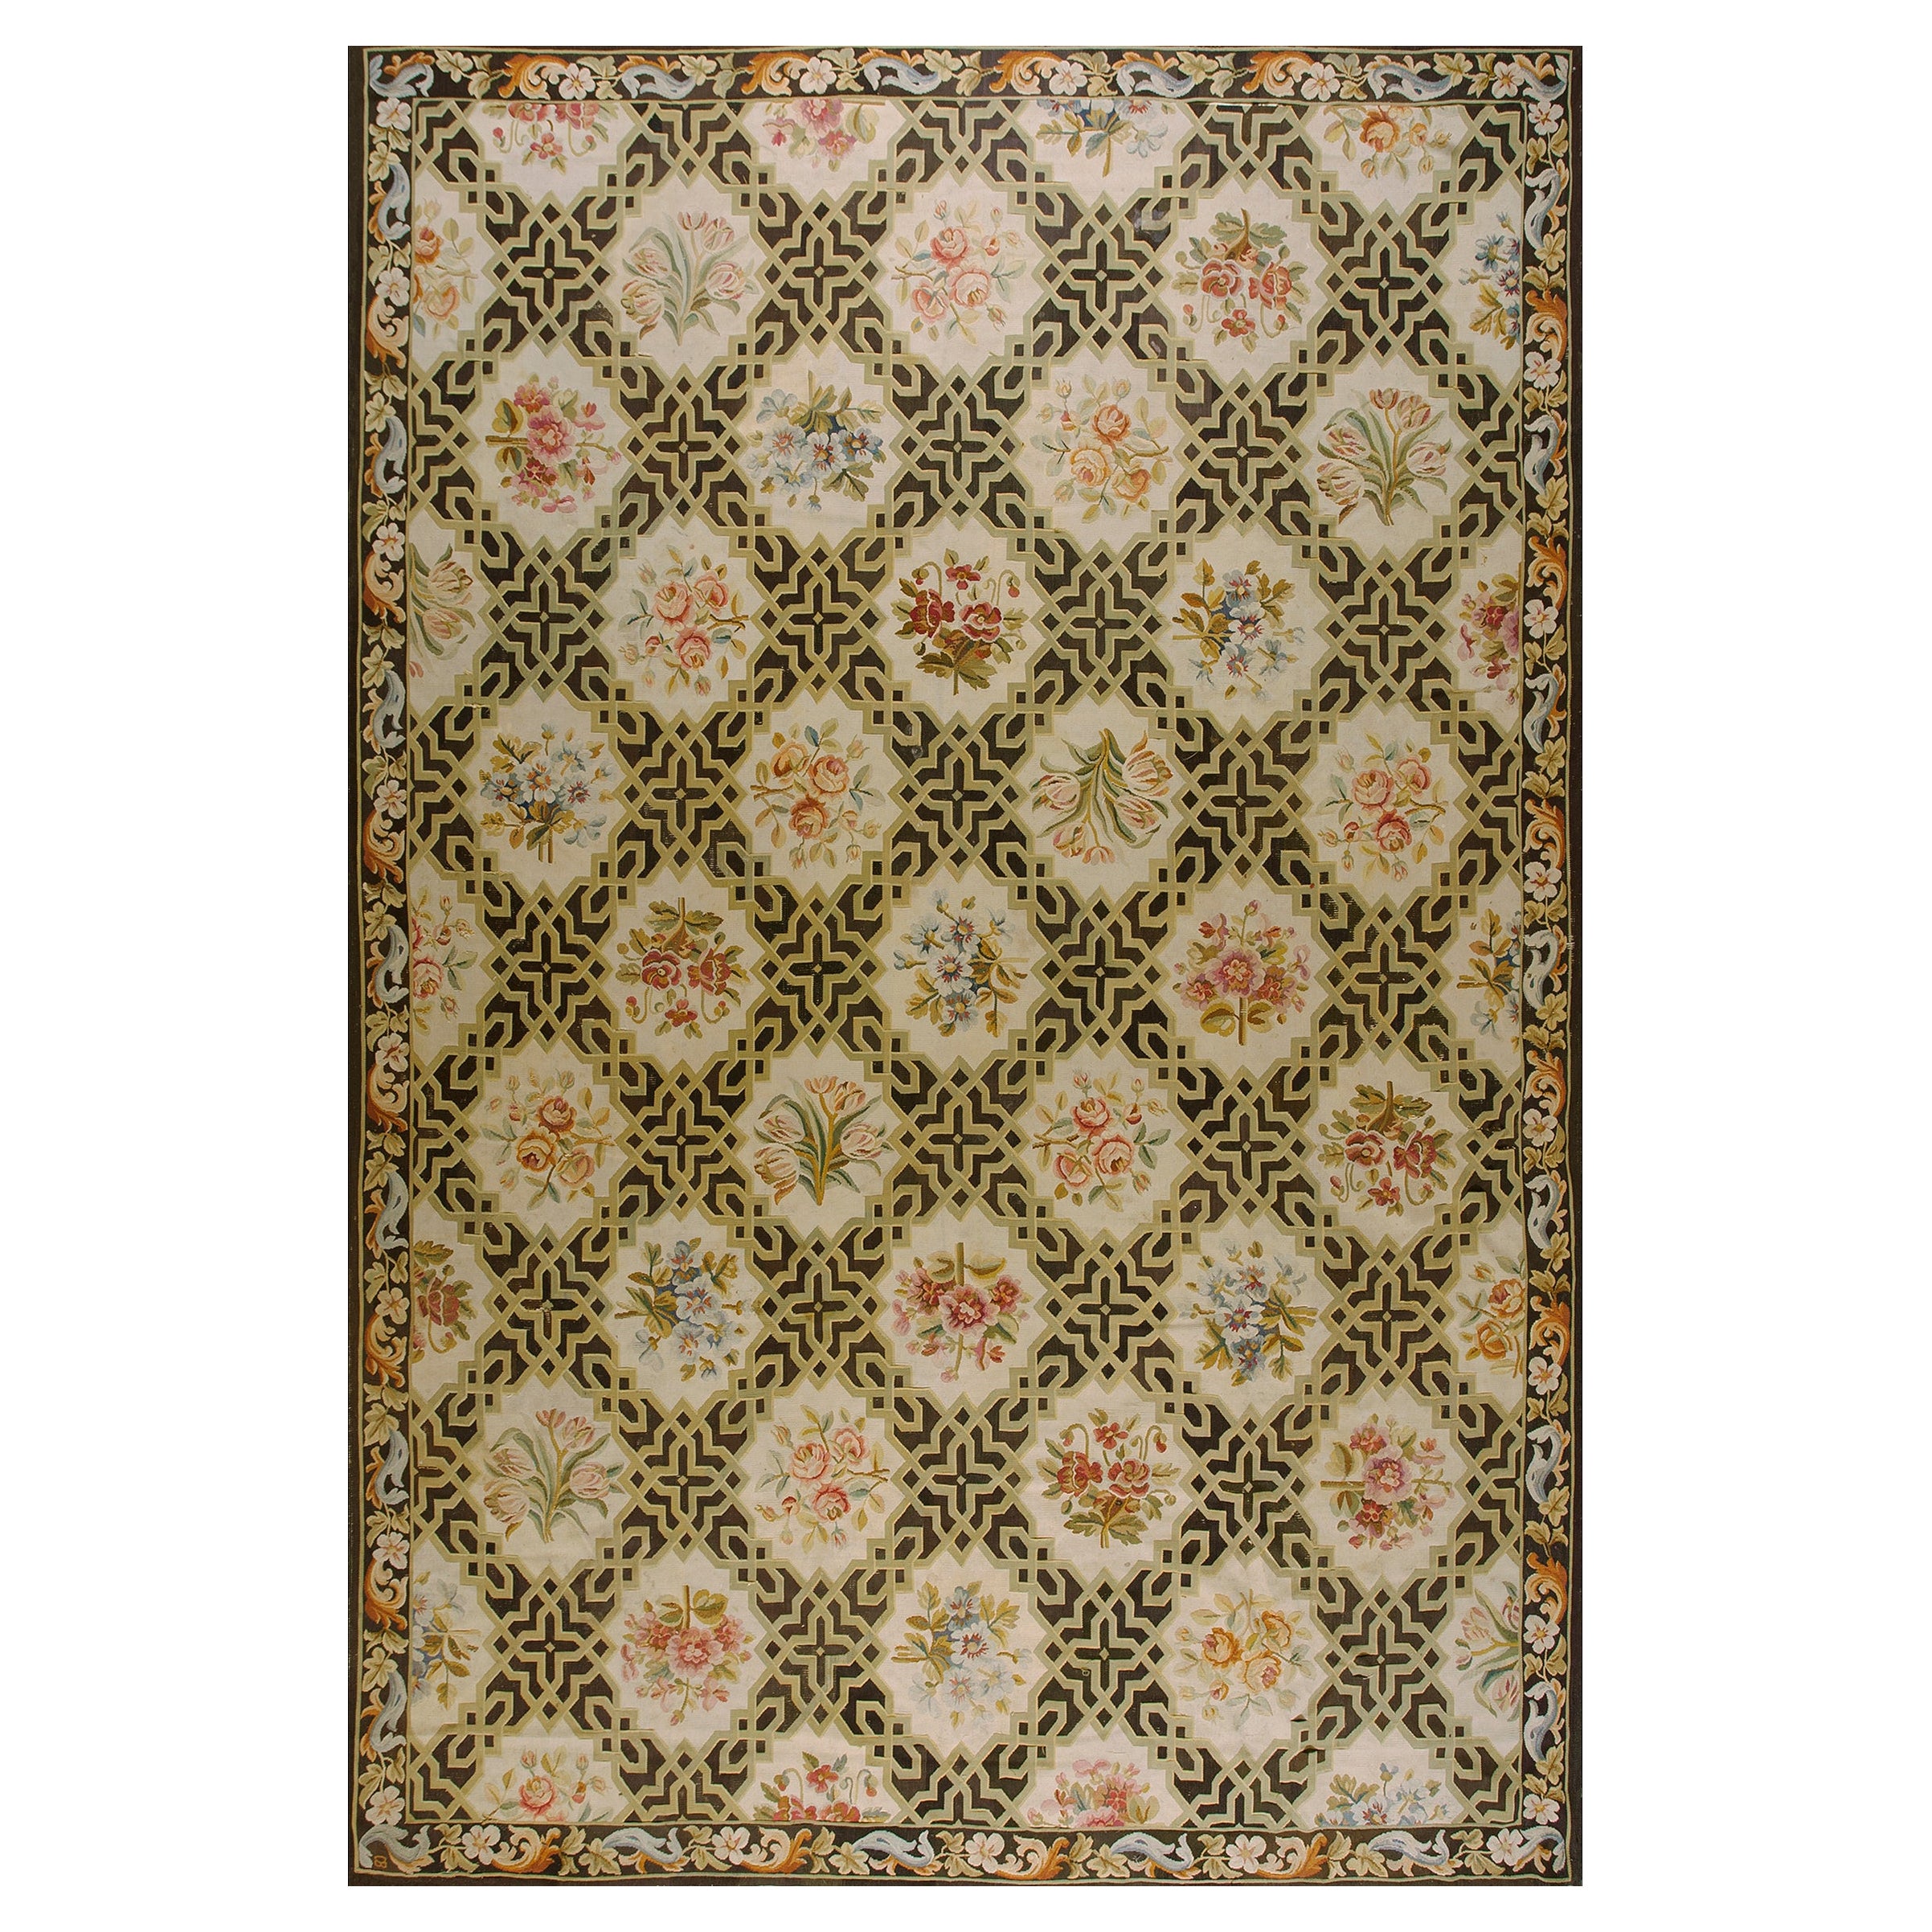 Early 20th Century French Aubusson Carpet ( 9' 8'' x 15' 3'' - 295 x 465 cm )